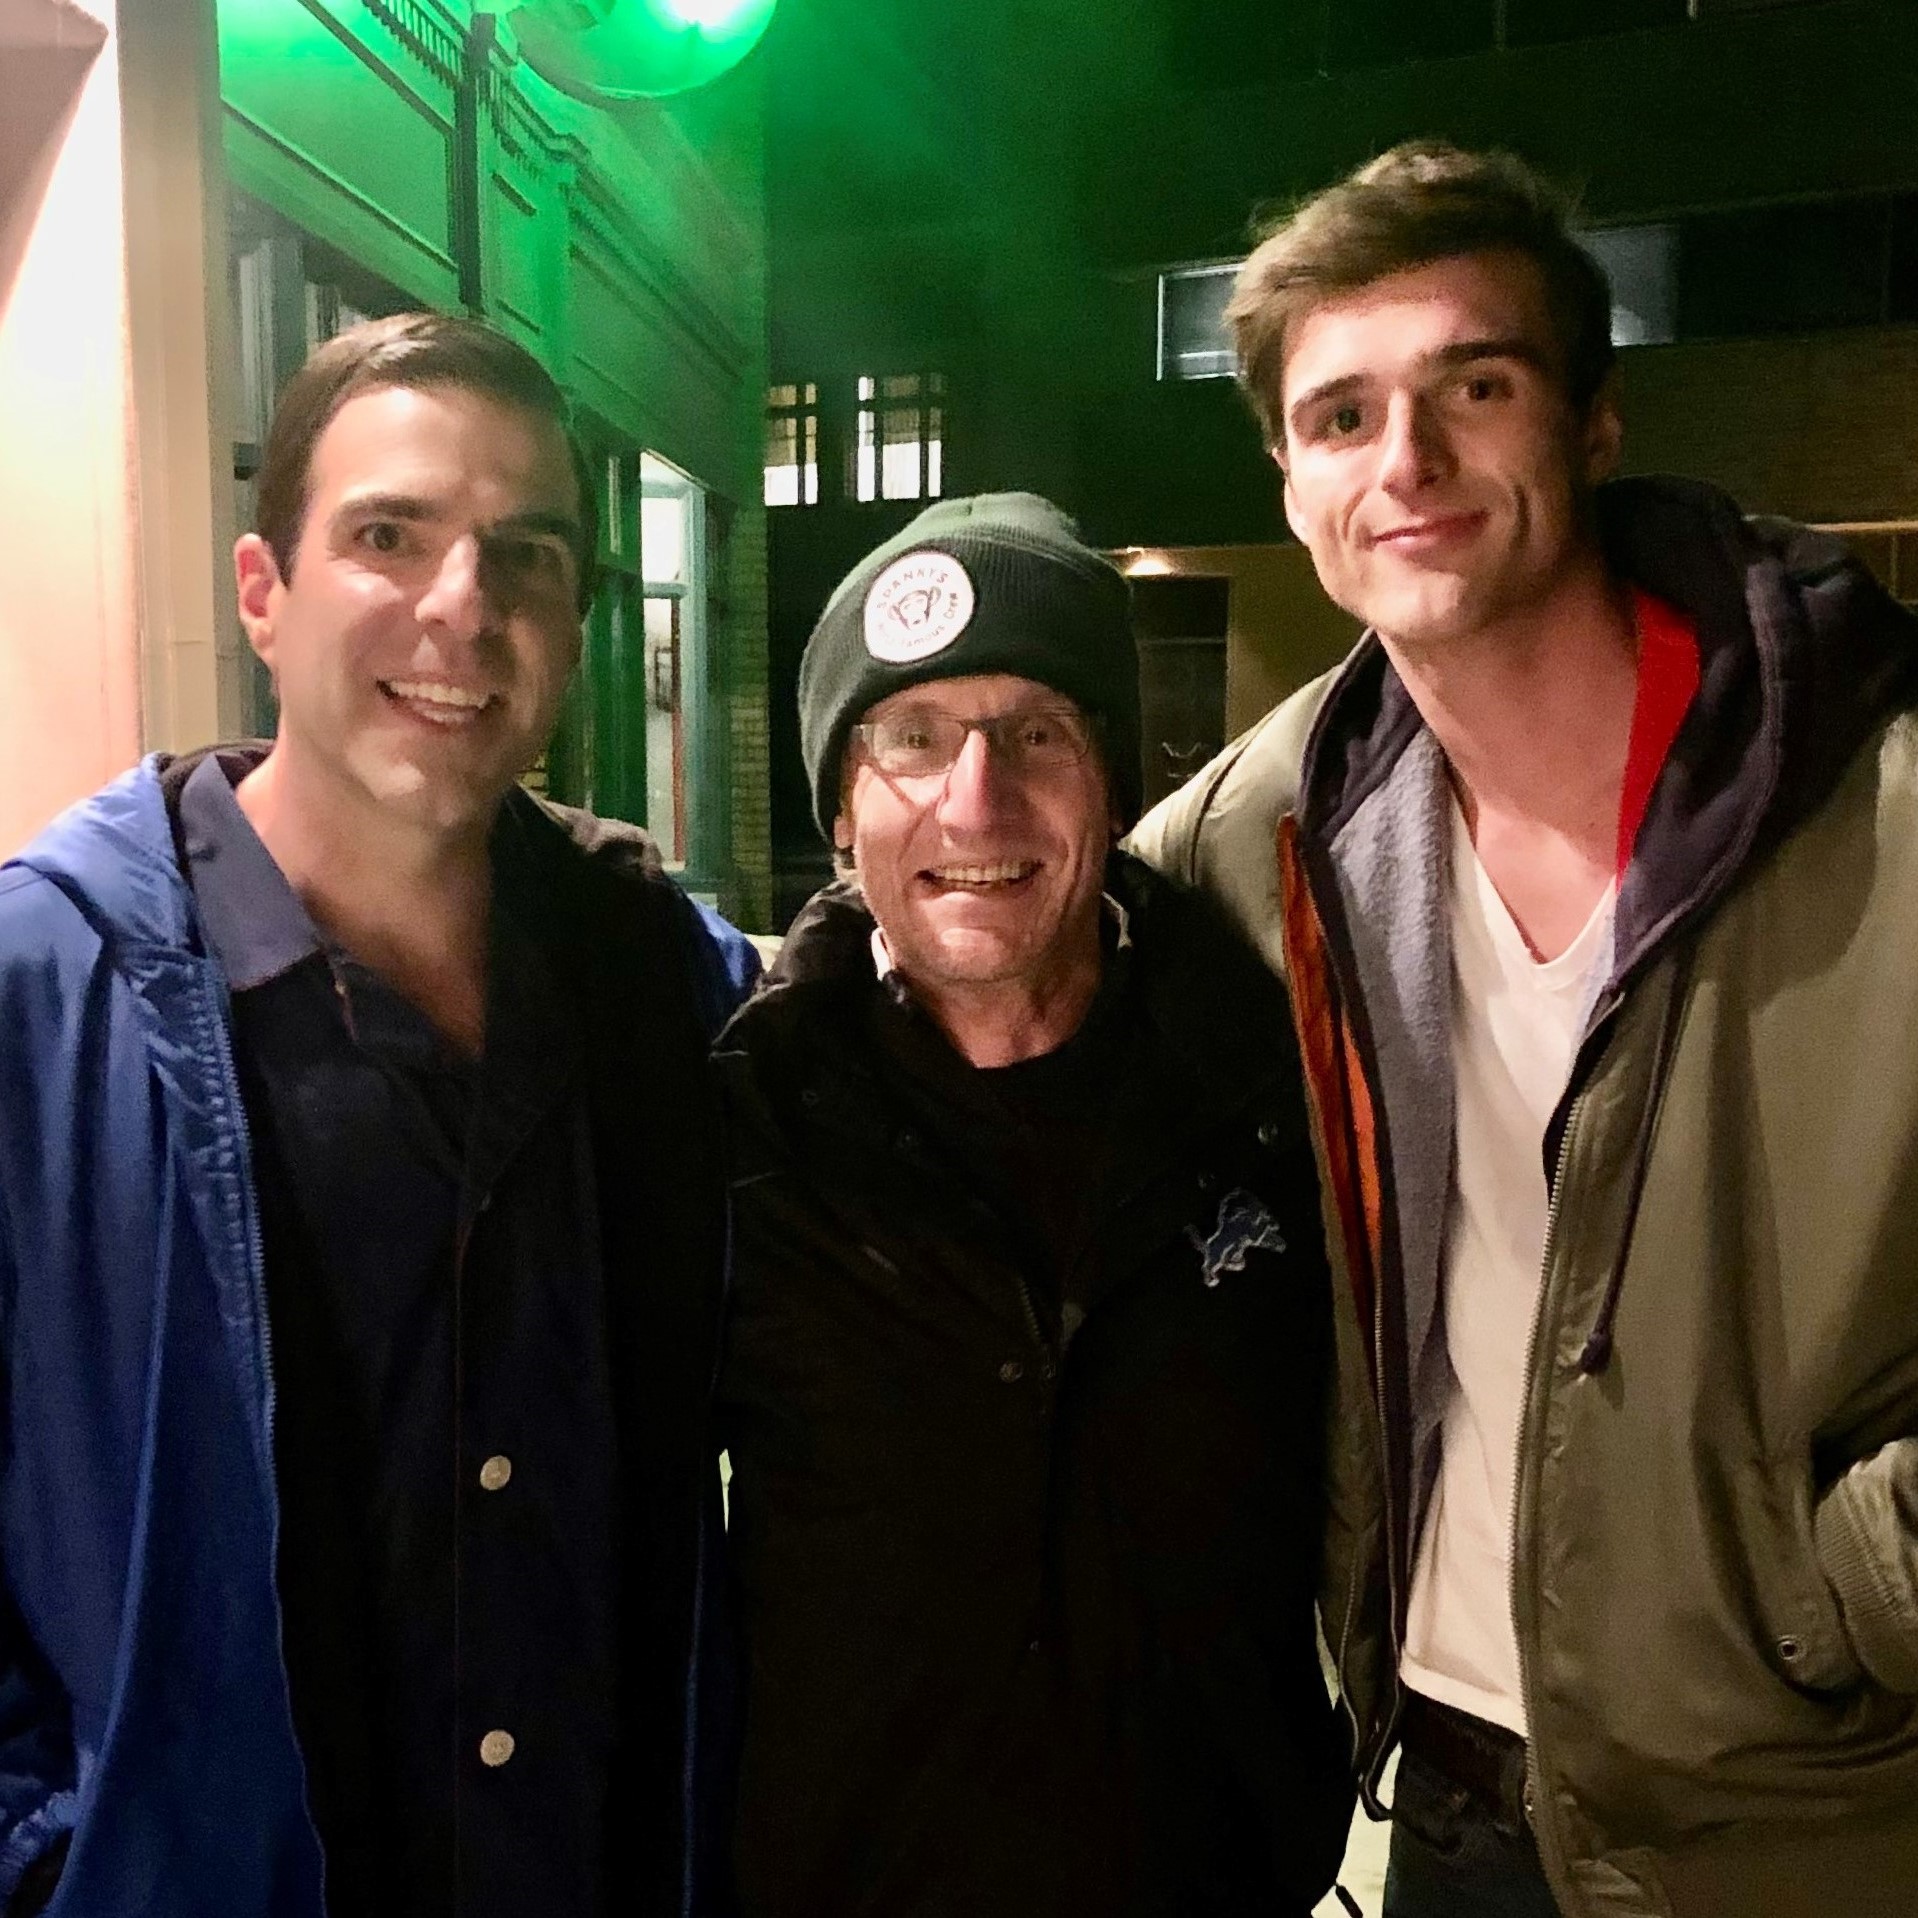 Hugh Broder with Zachary Quinto and Jacob Elordi_showcase